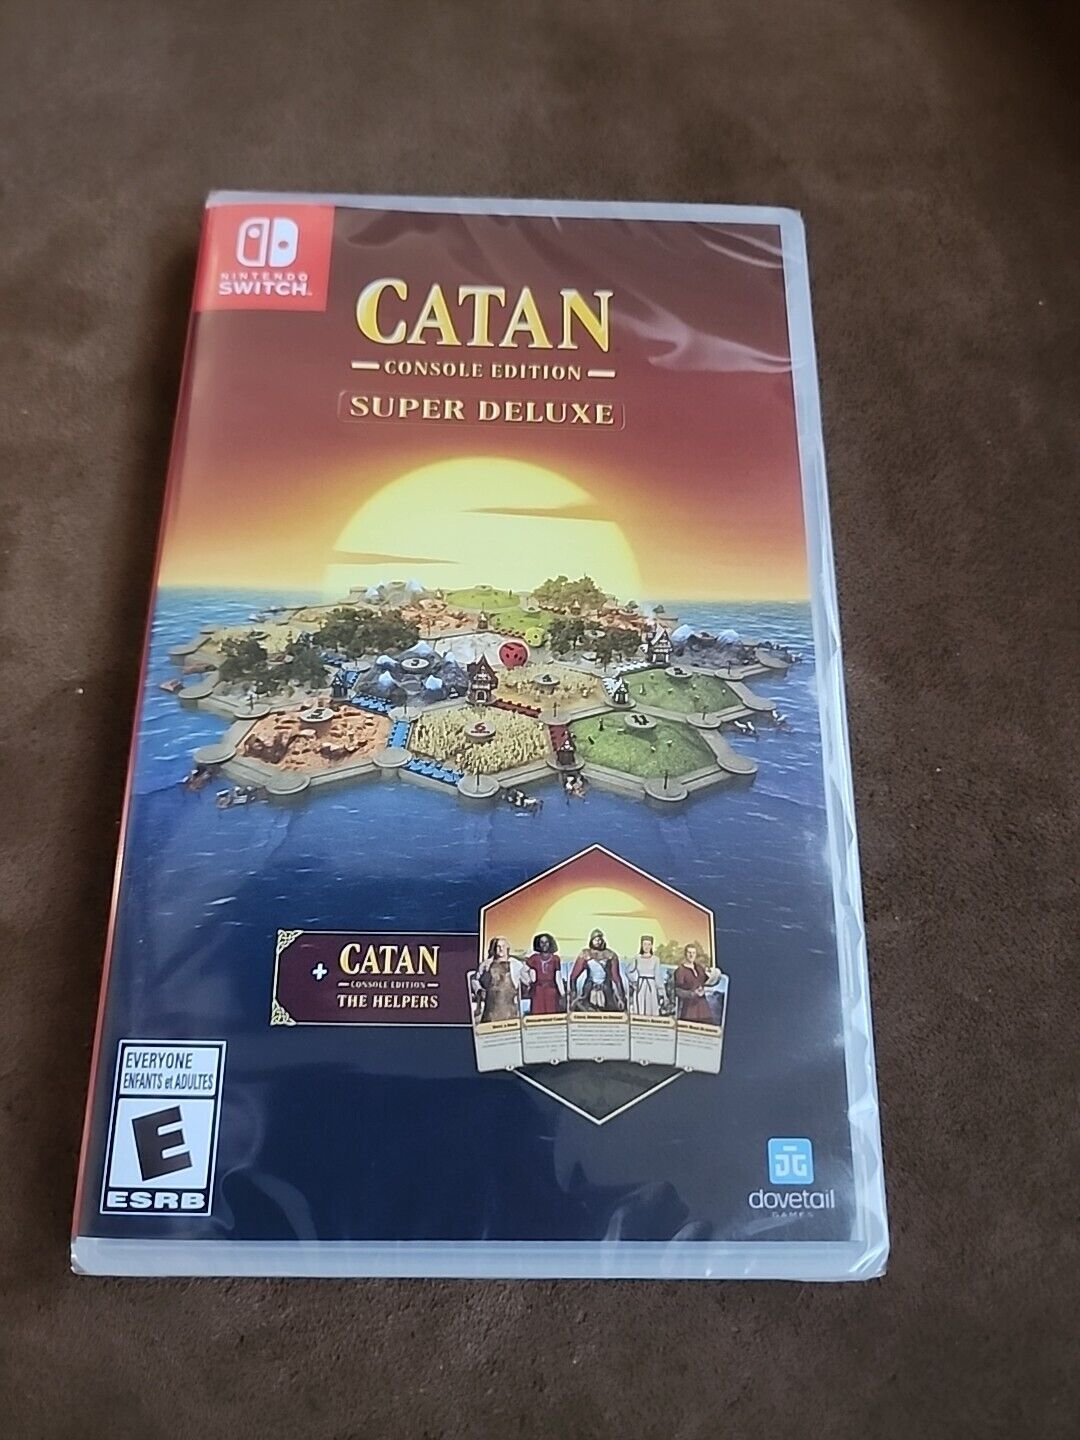 Catan Console Edition: Super Deluxe Nintendo Switch **BRAND NEW** FACTORY SEALED